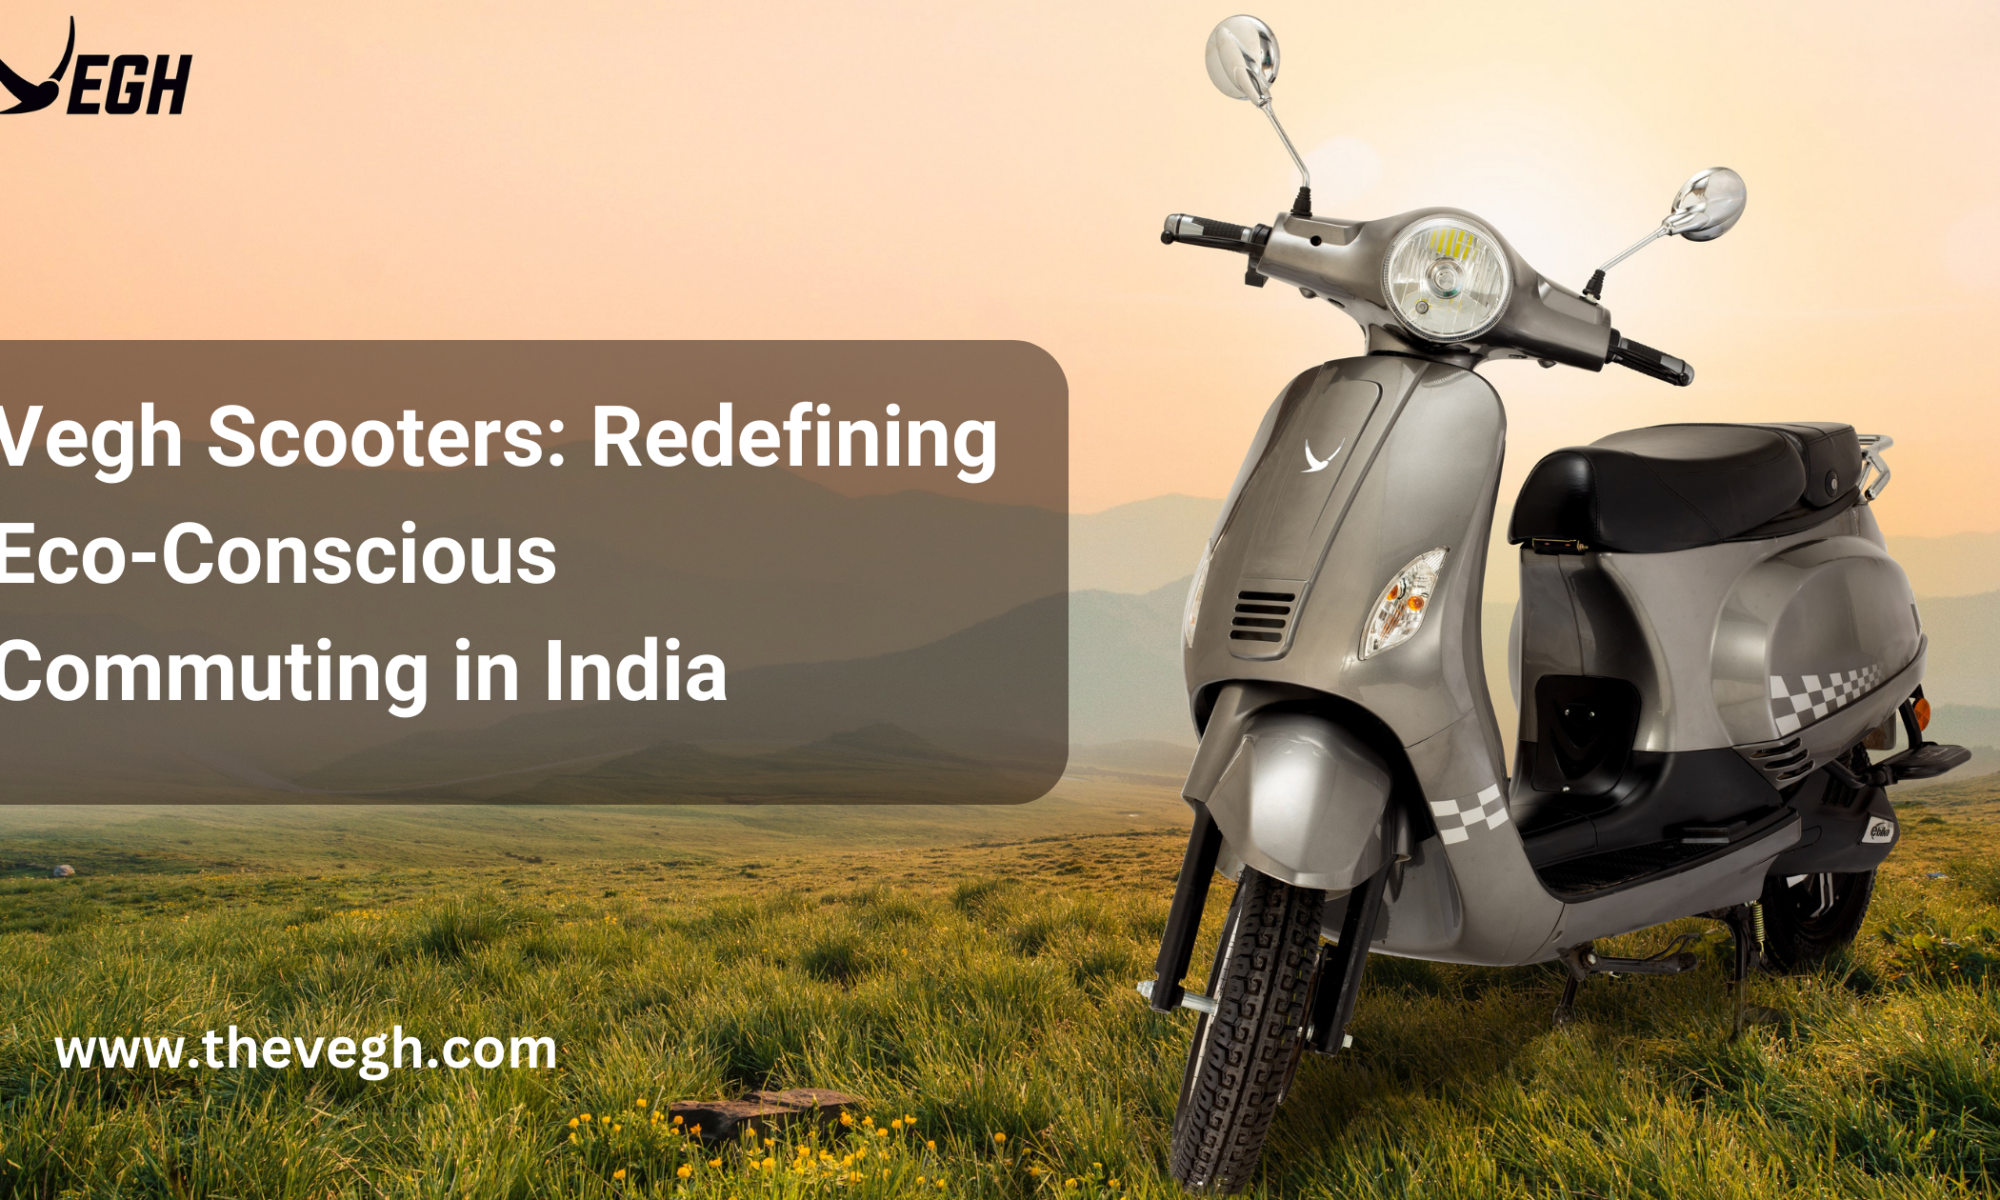 Vegh Scooters Redefining Eco-Conscious Commuting in India